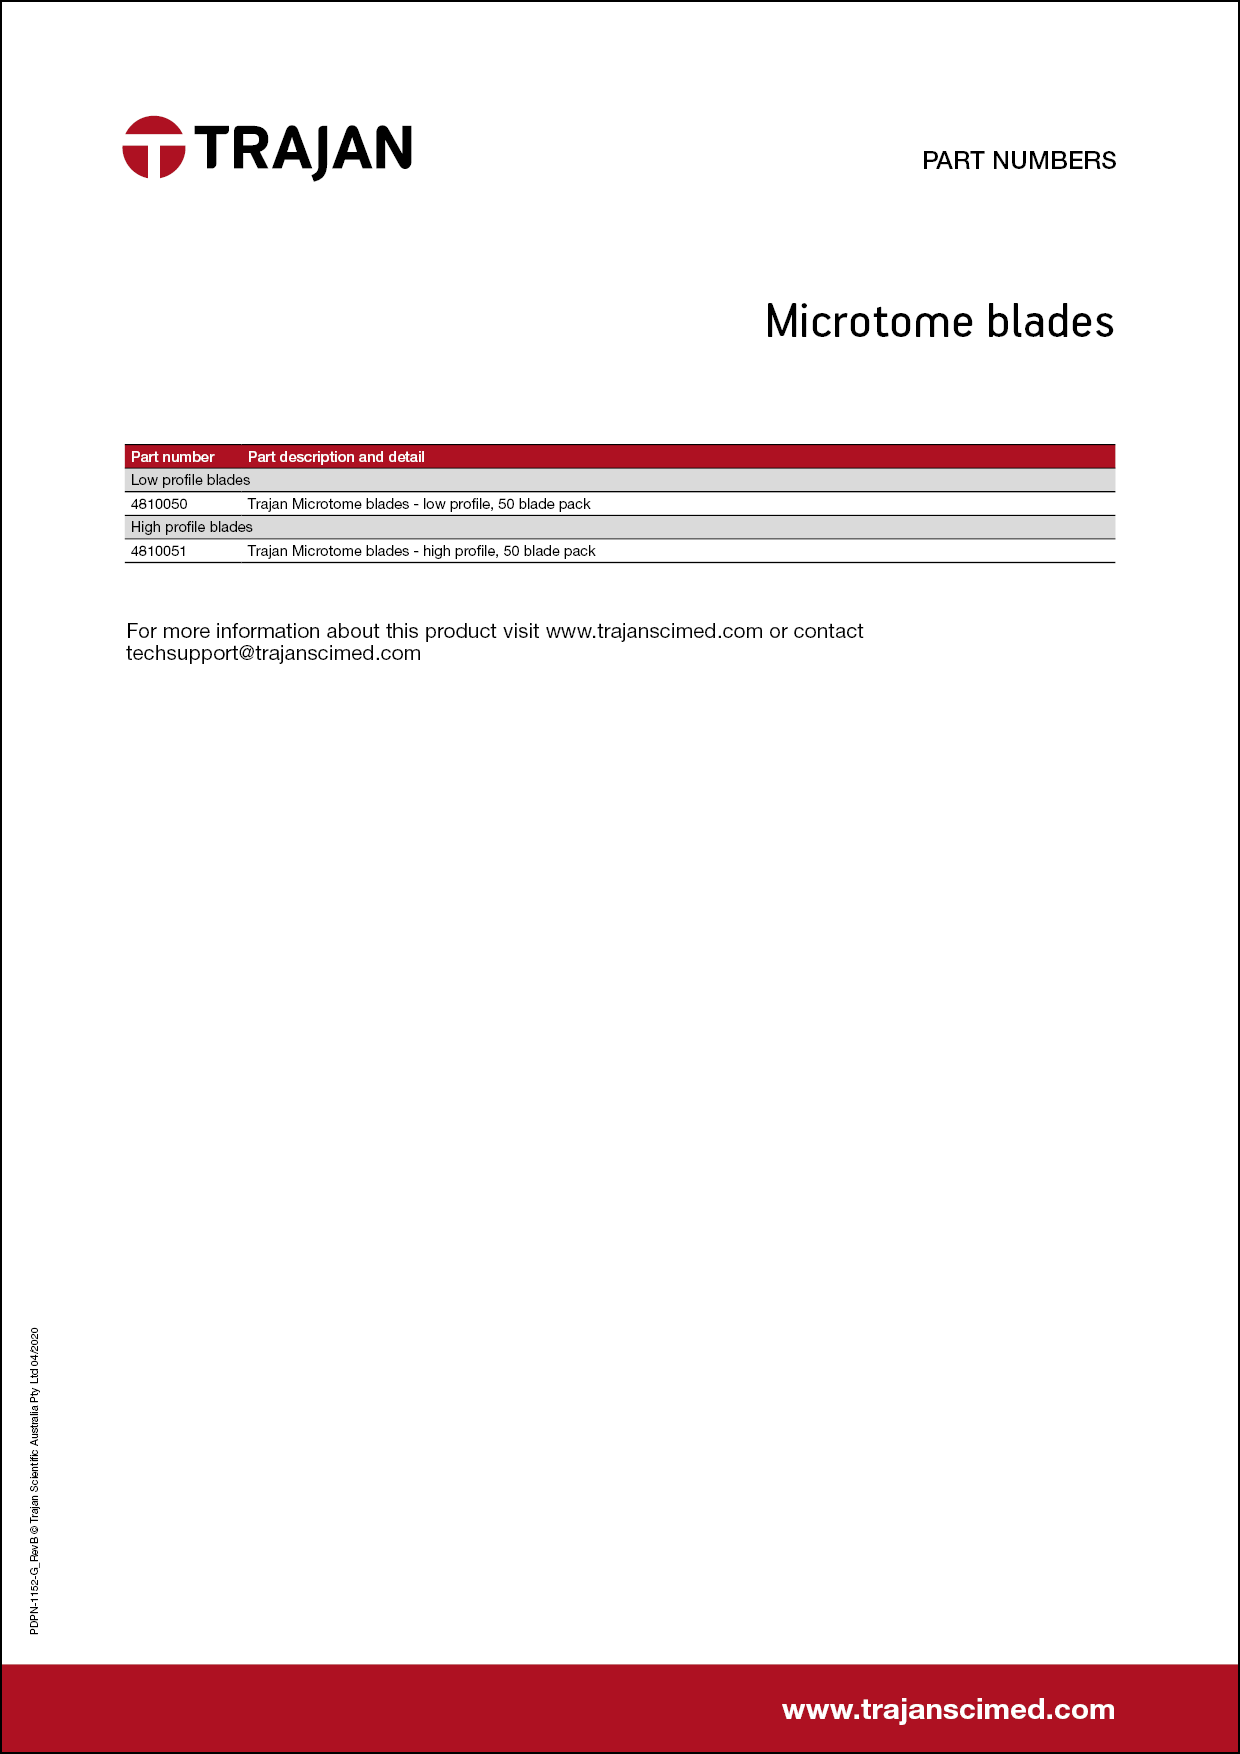 Part Number List - Microtome blades